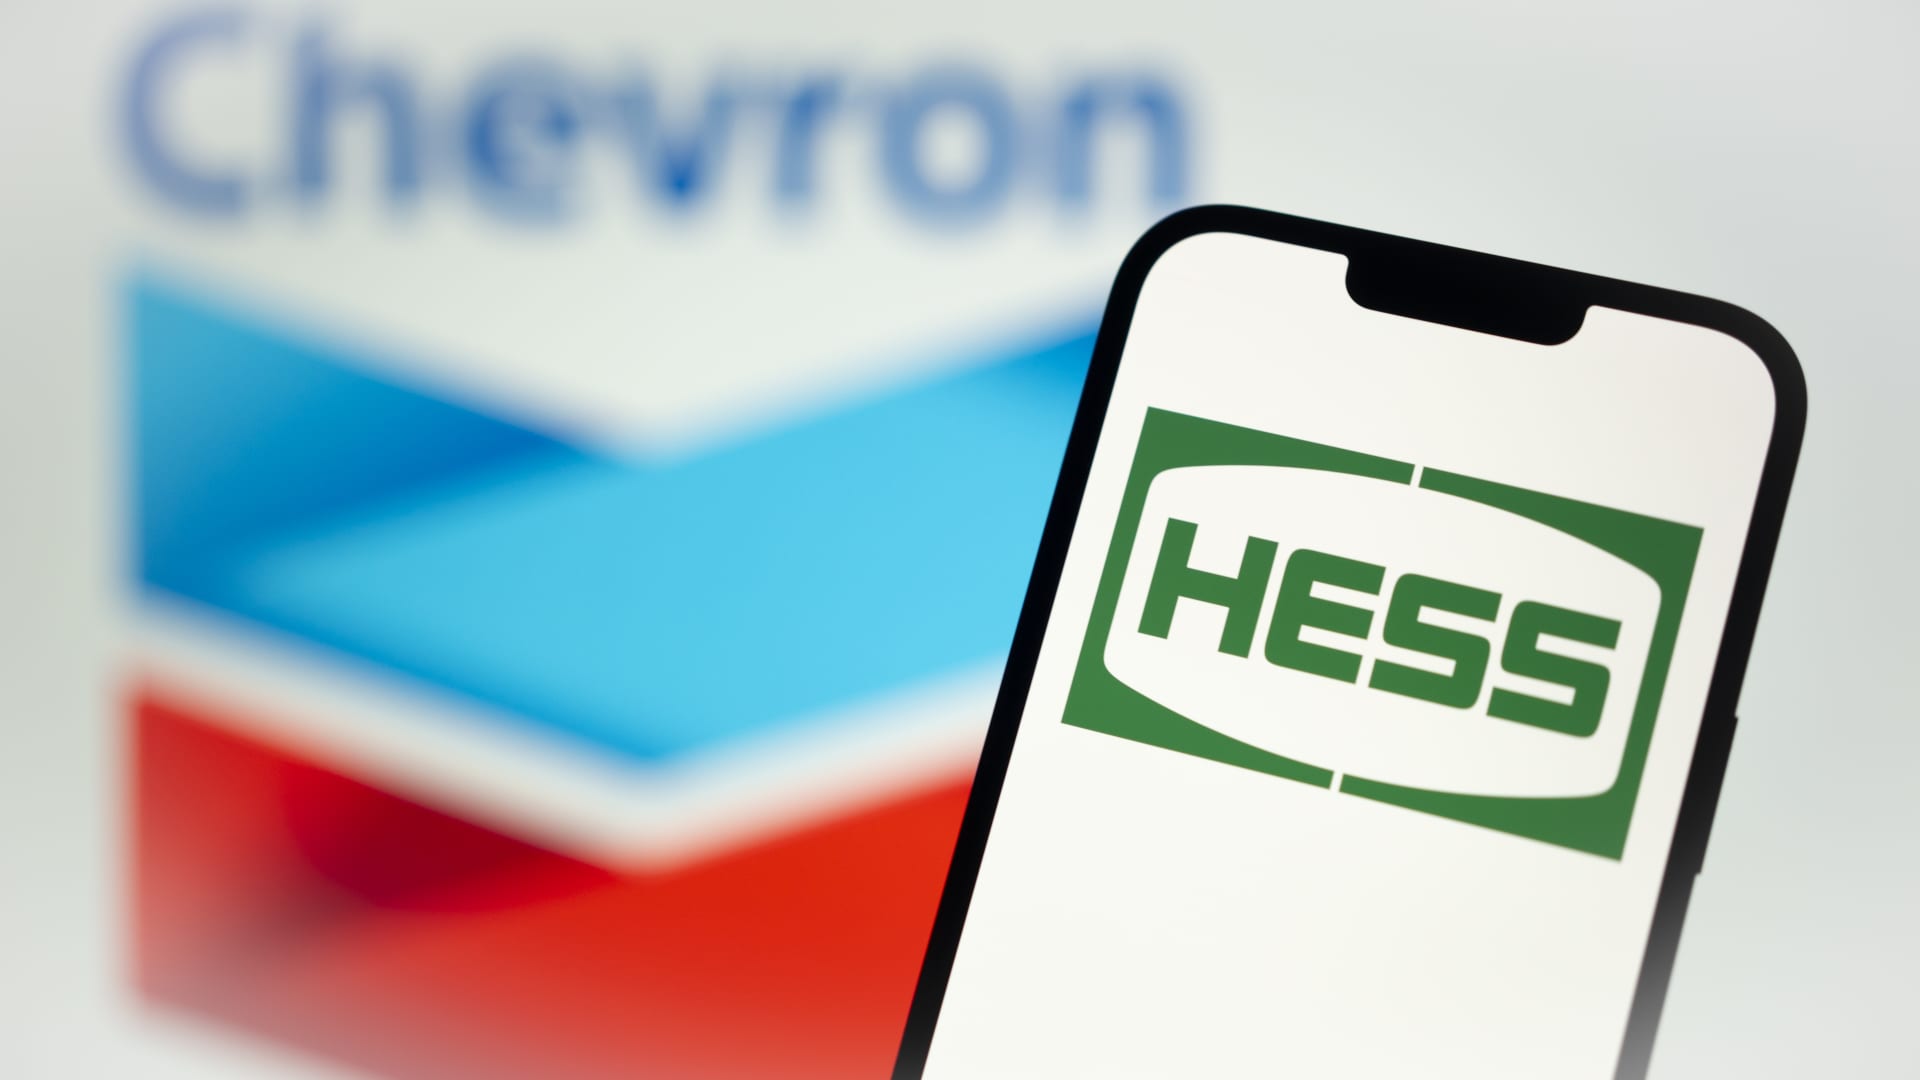 Hess shares drop as fight with Exxon Mobil over Guyana oil threatens Chevron takeover